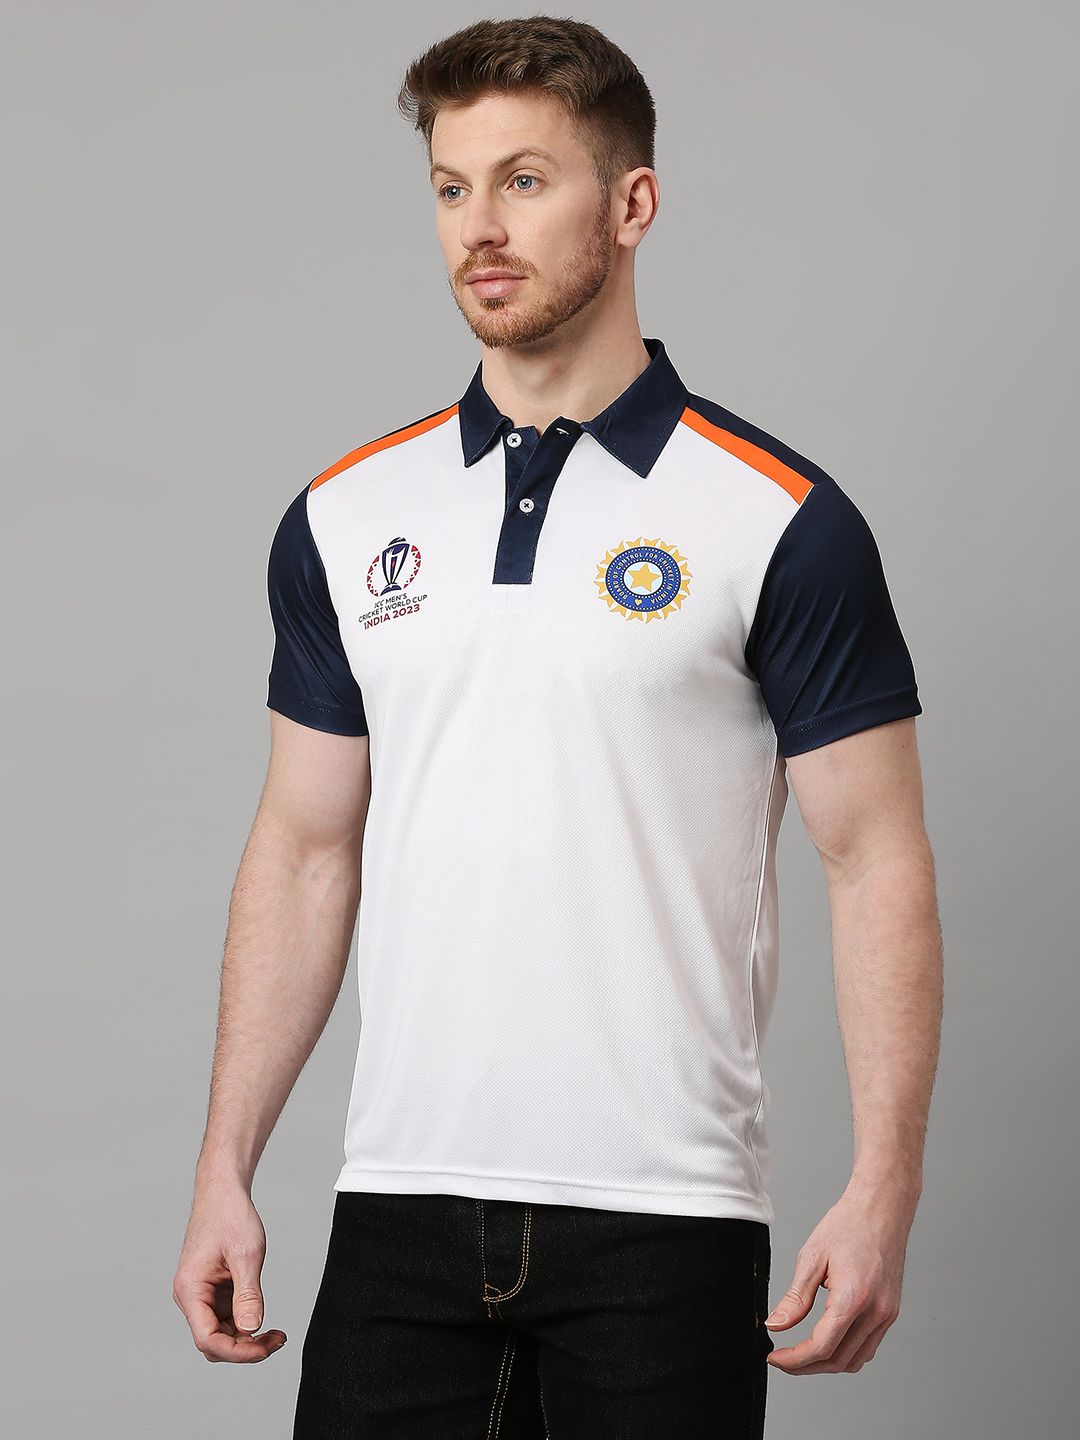 Buy Official ICC CWC-23 Men White and Navy Blue Colourblocked Short ...